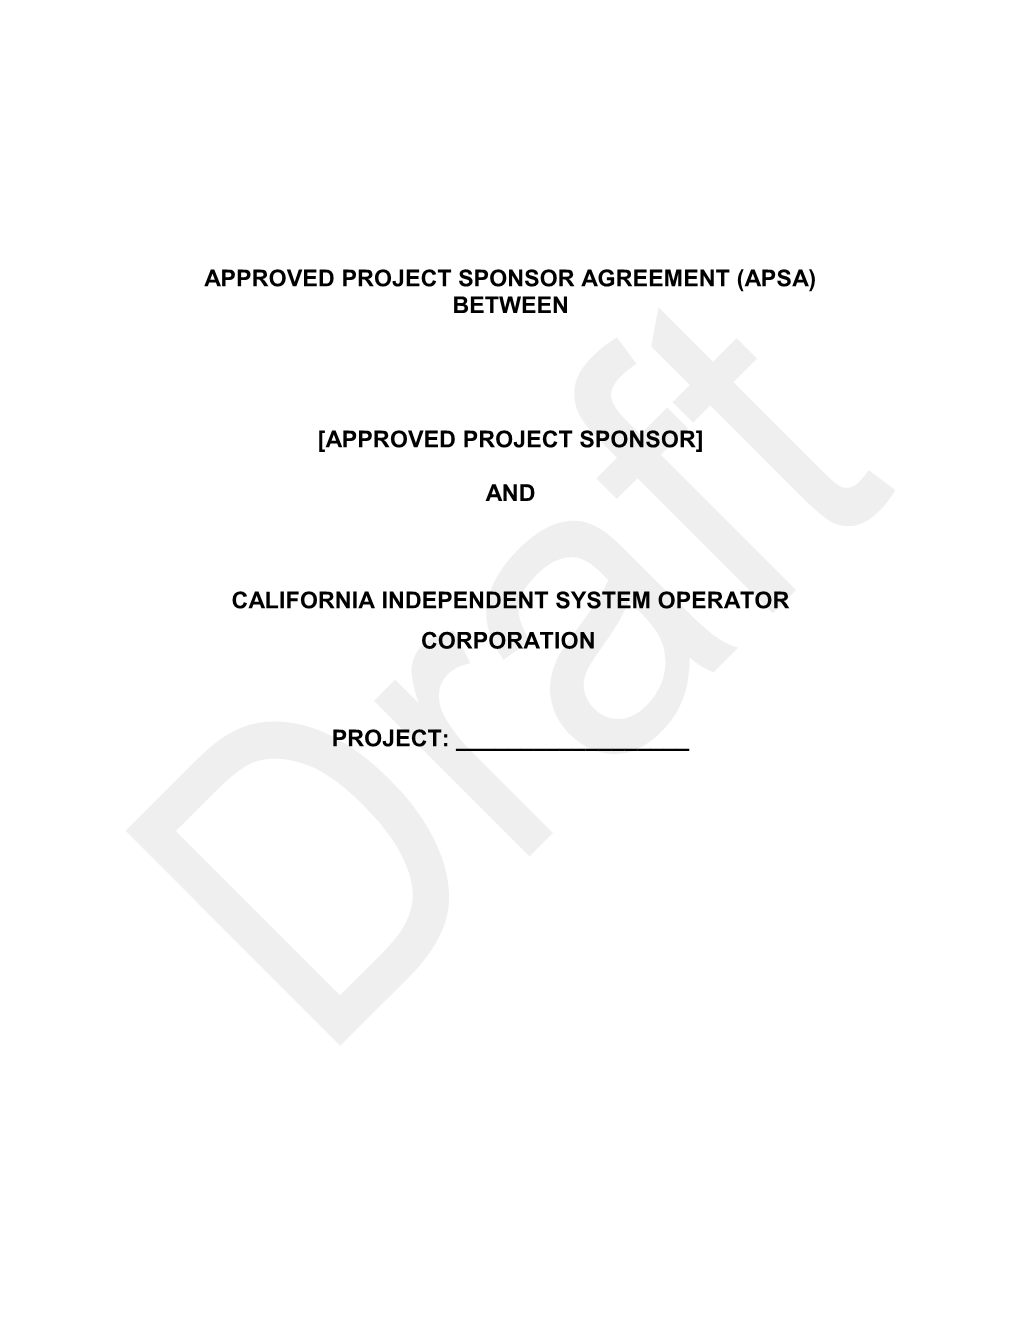 Draft Pro Forma Approved Project Sponsor Agreement